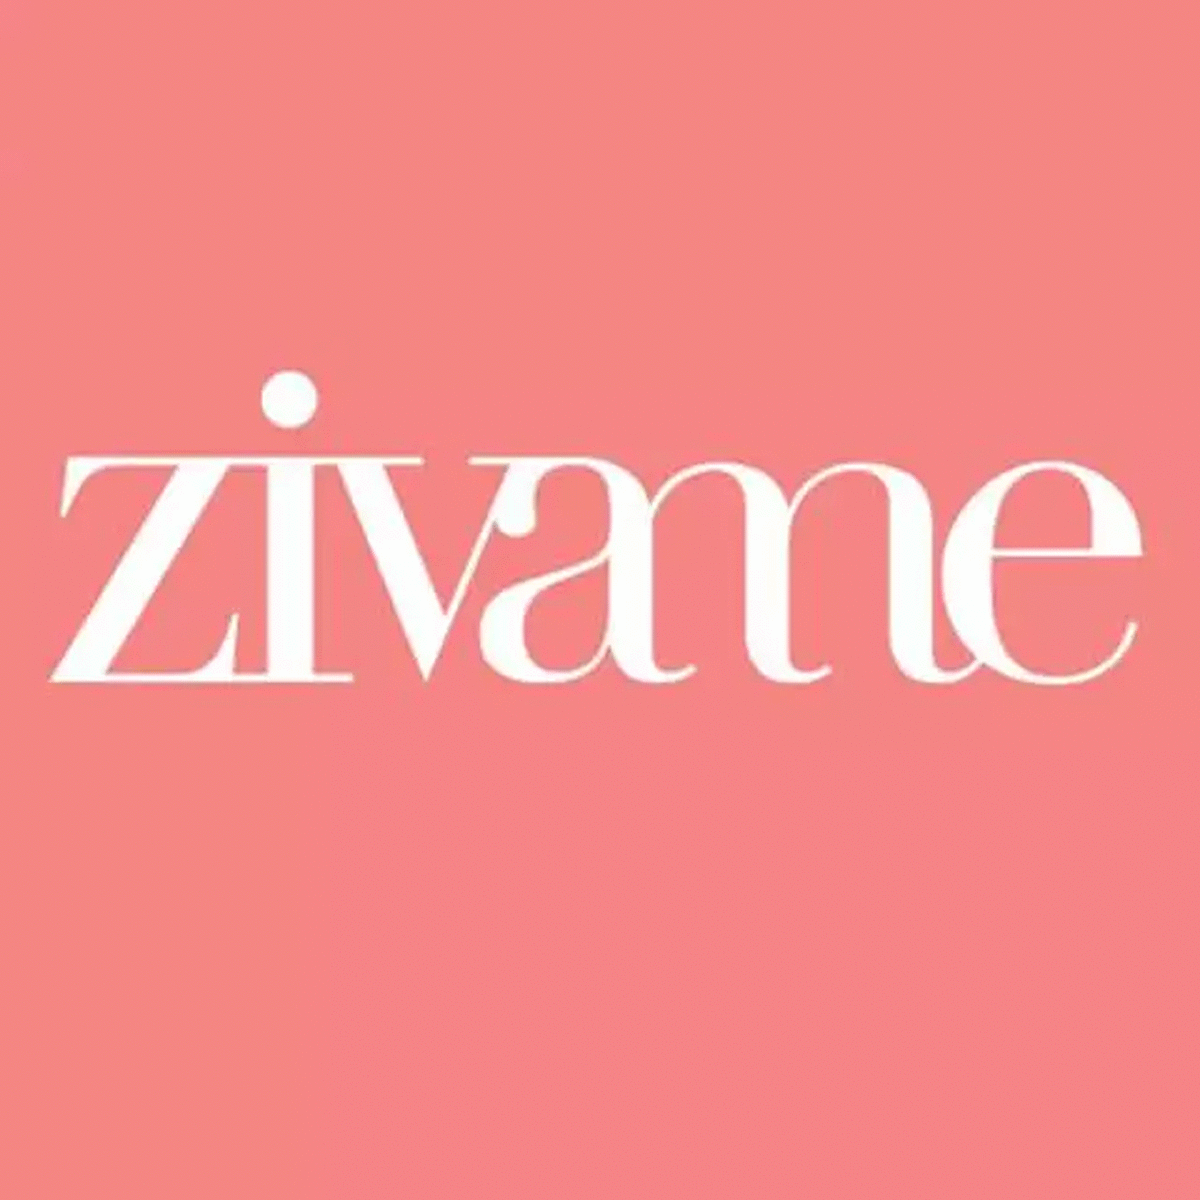 Zivame - The best way to kickoff Holi is with our full